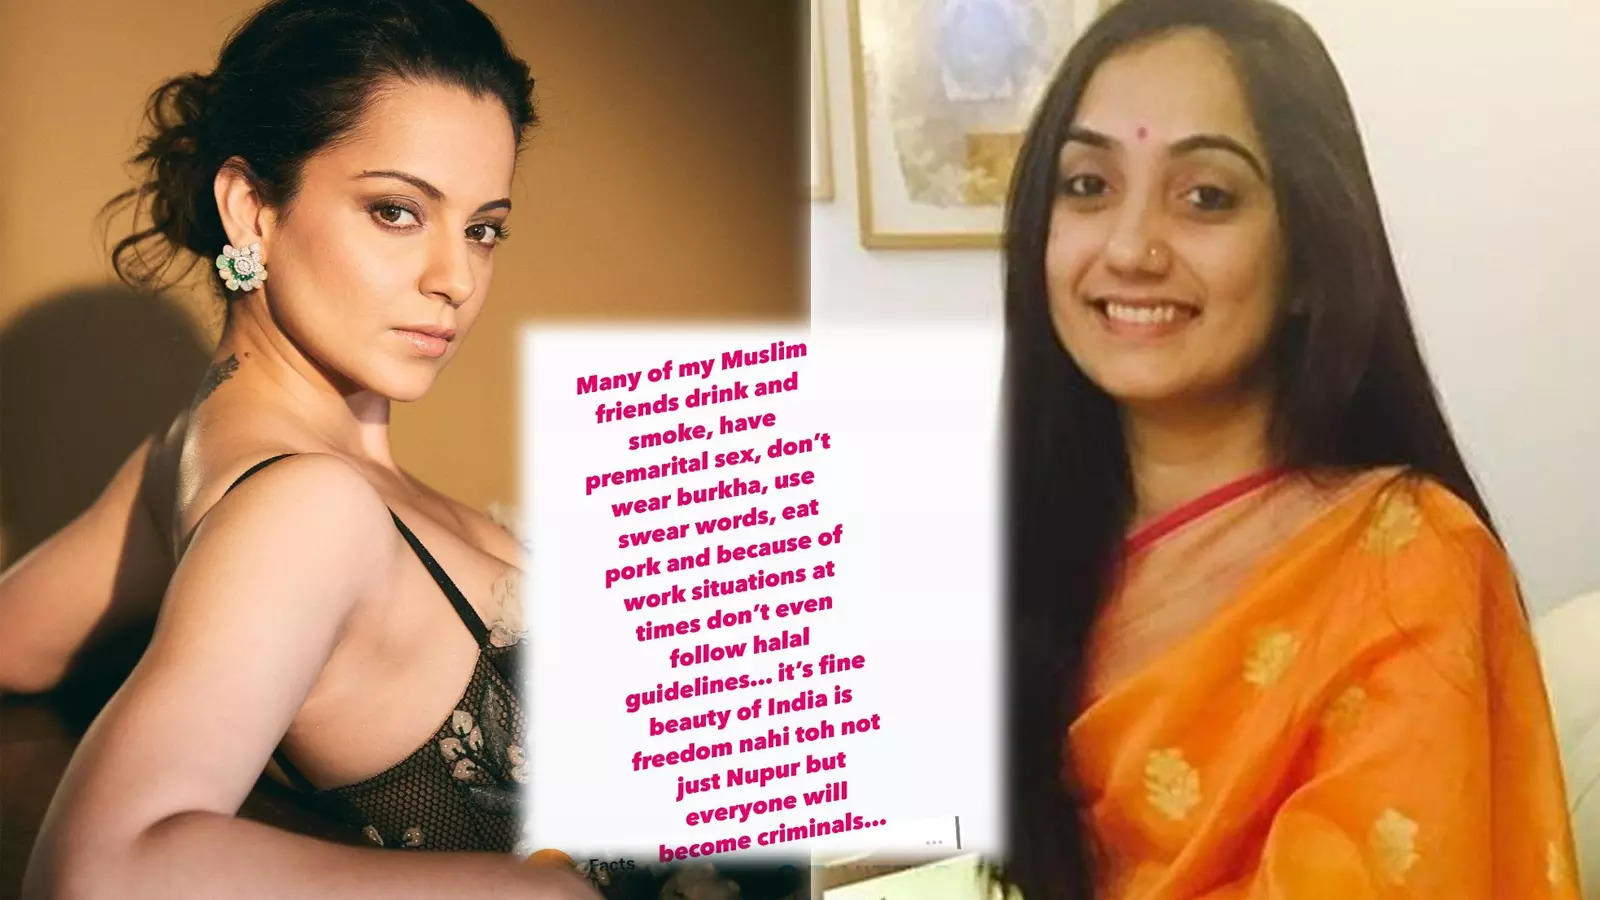 Prophet remarks! Kangana Ranaut defends Nupur Sharma again Many of my Muslim friends drink, smoke, have premarital s** picture